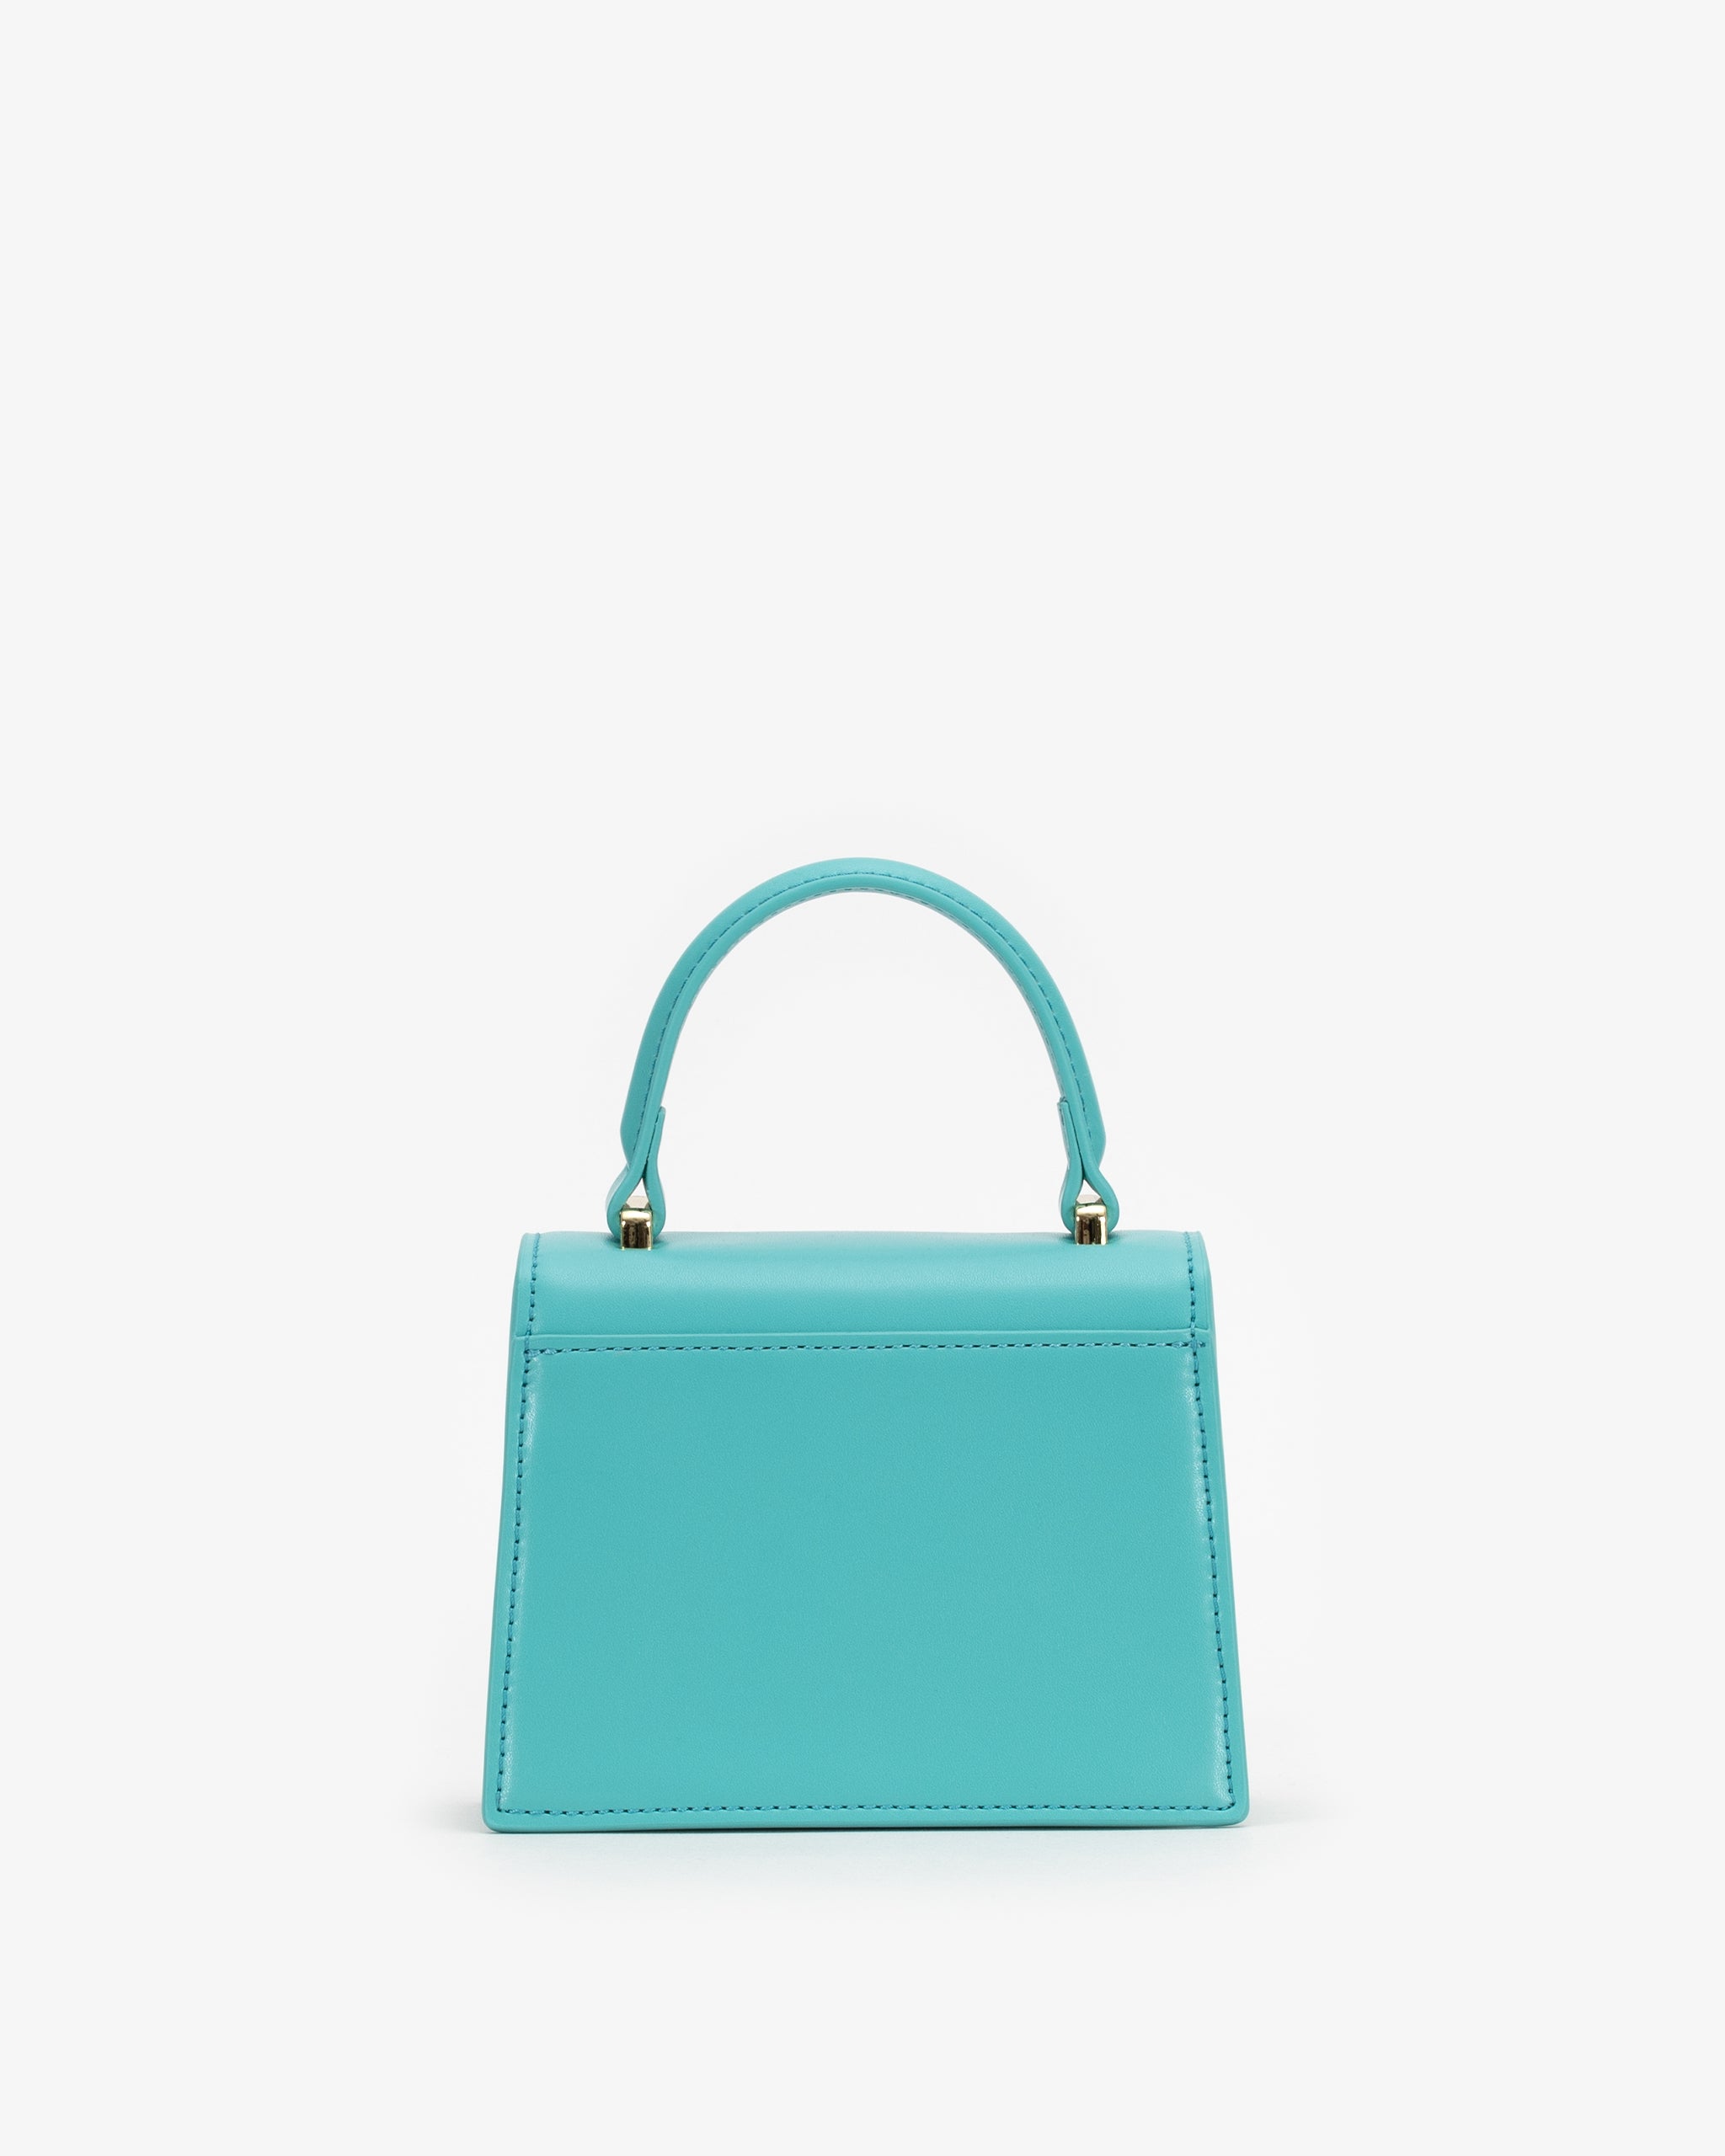 Mini Evening Bag in Turquoise with Personalised Hardware